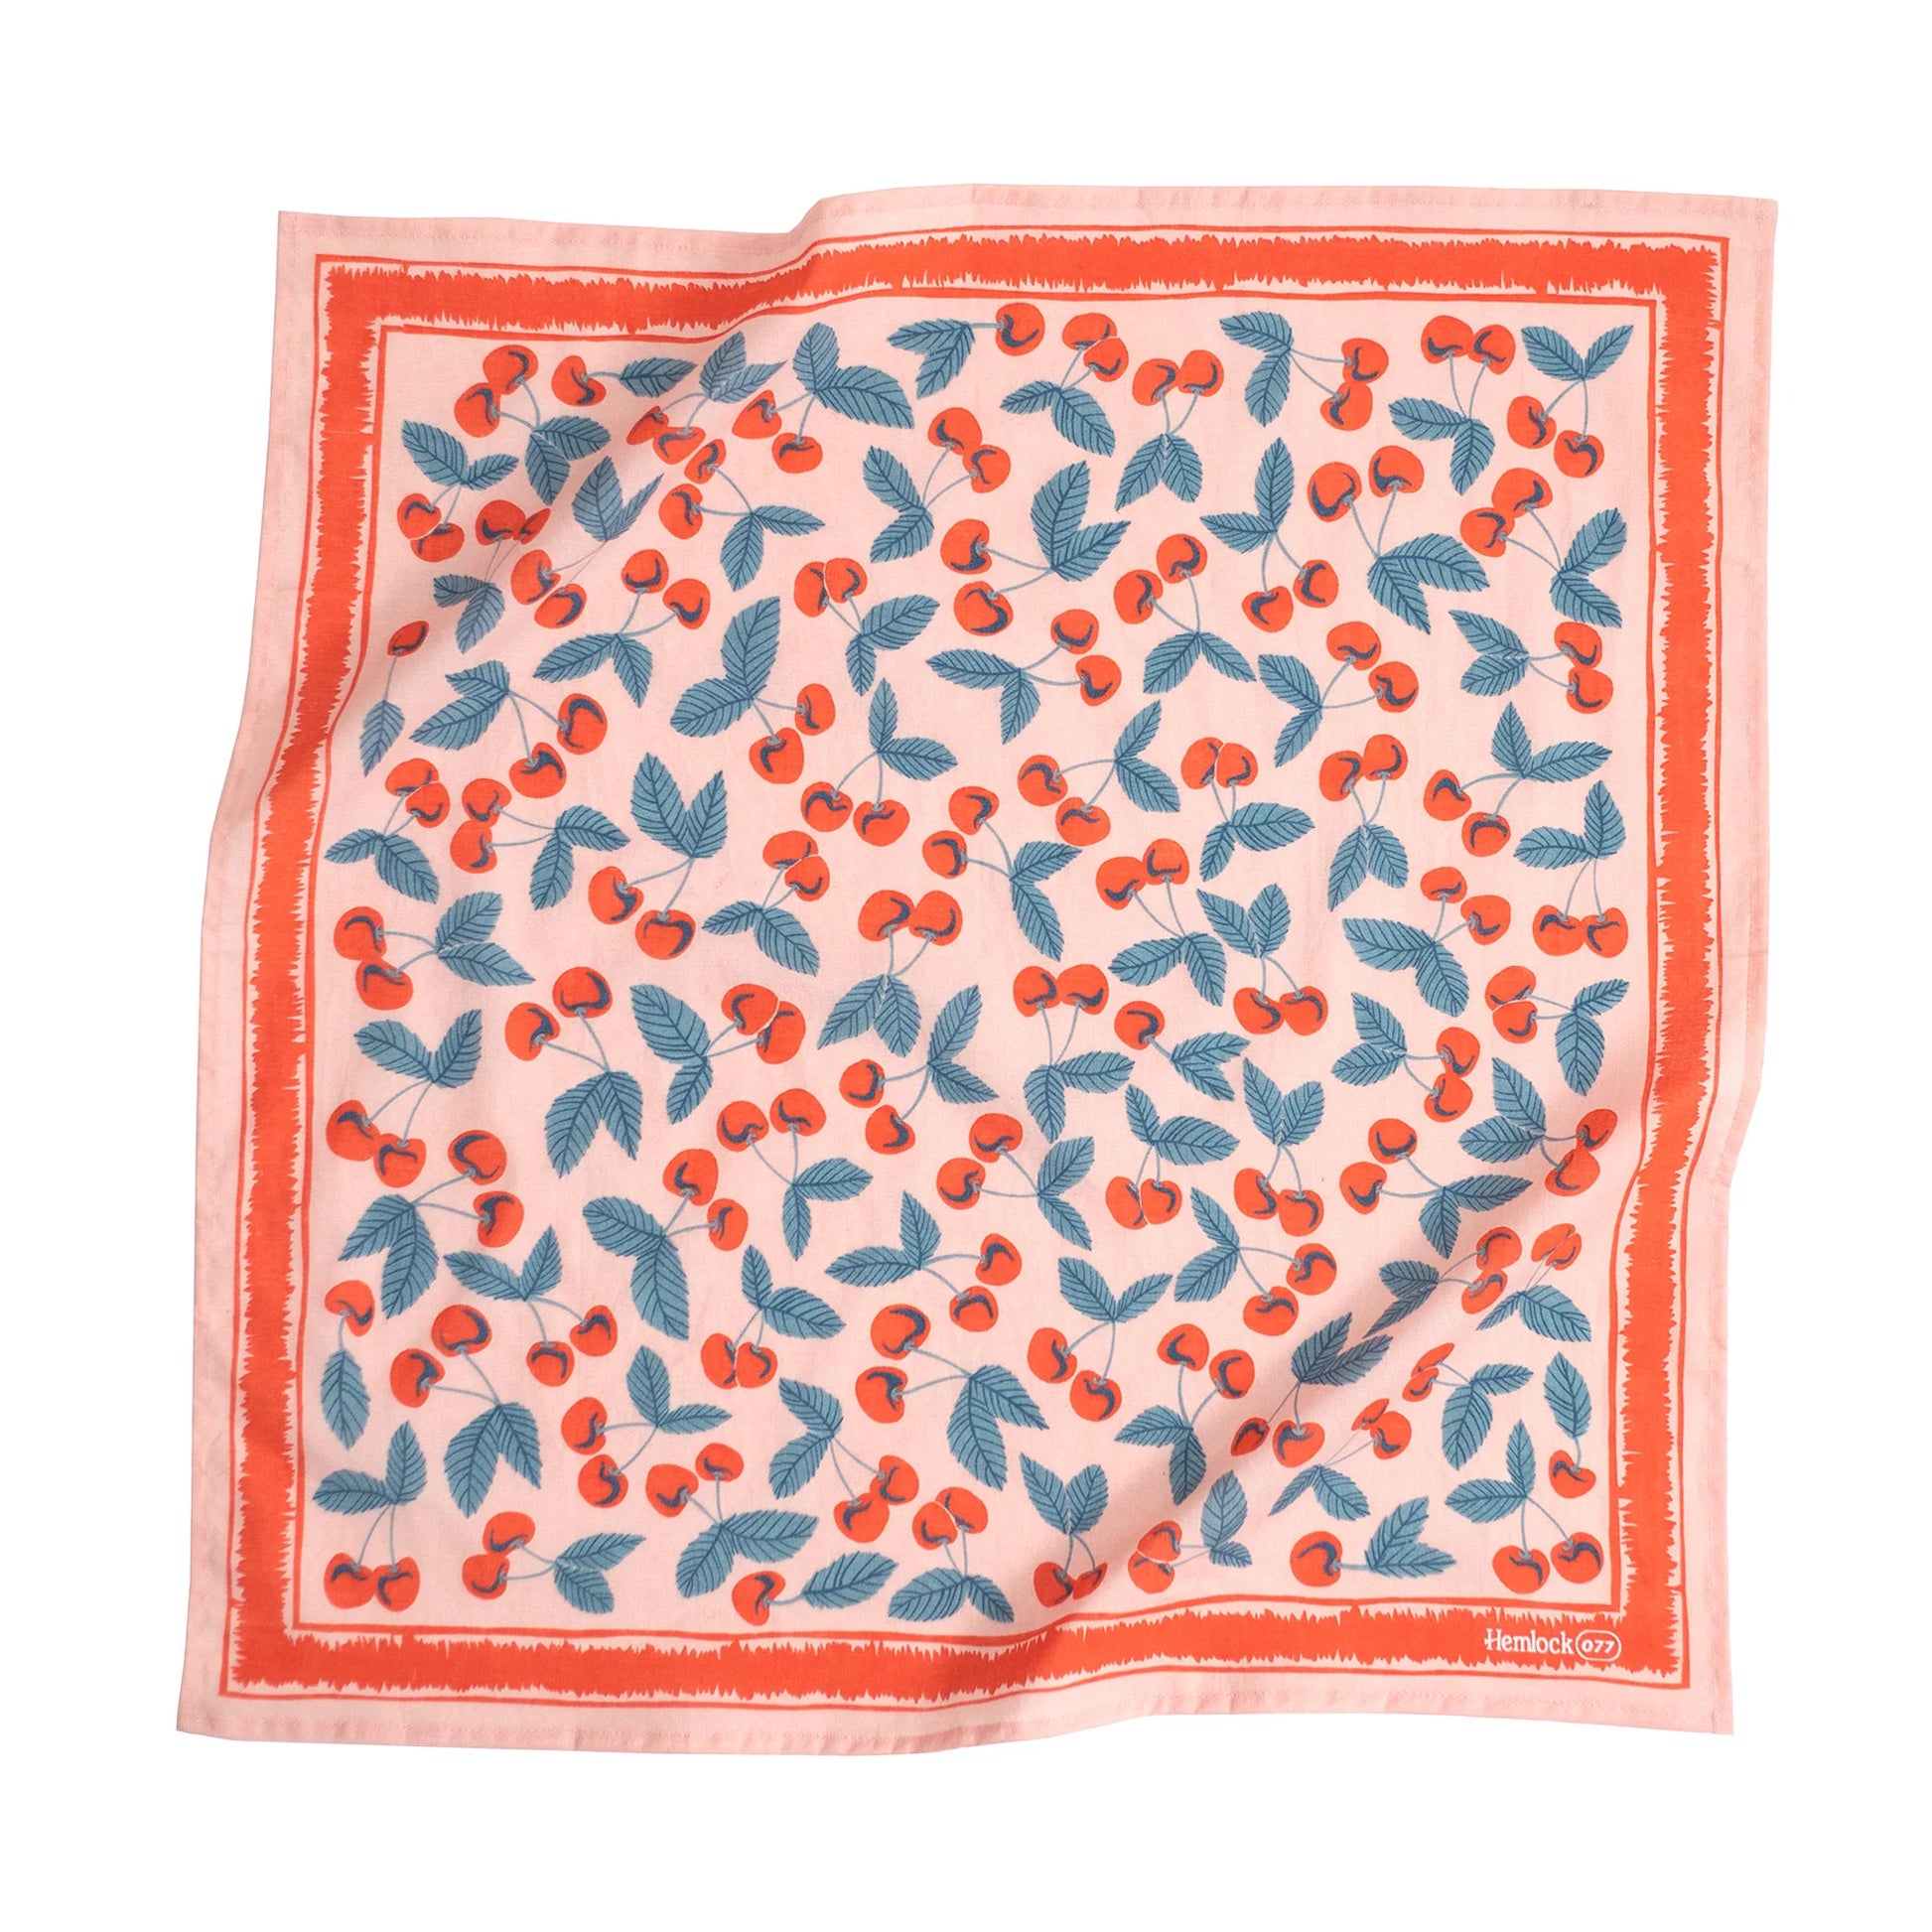 Light pink bandana with red border -- print is connected cherries with leaves